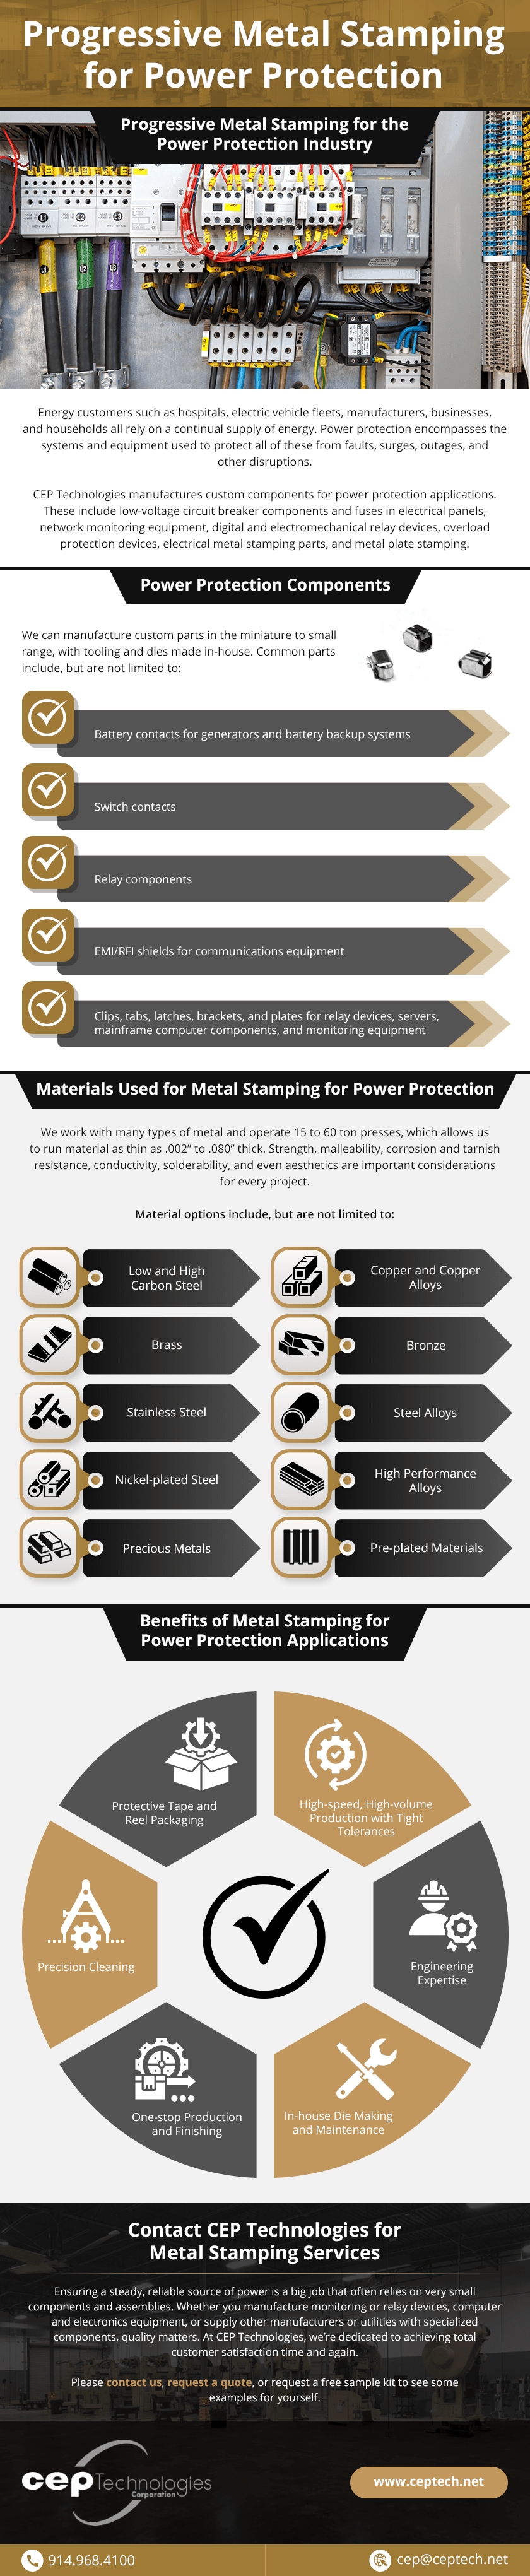 Progressive metal stamping for power protection infographic